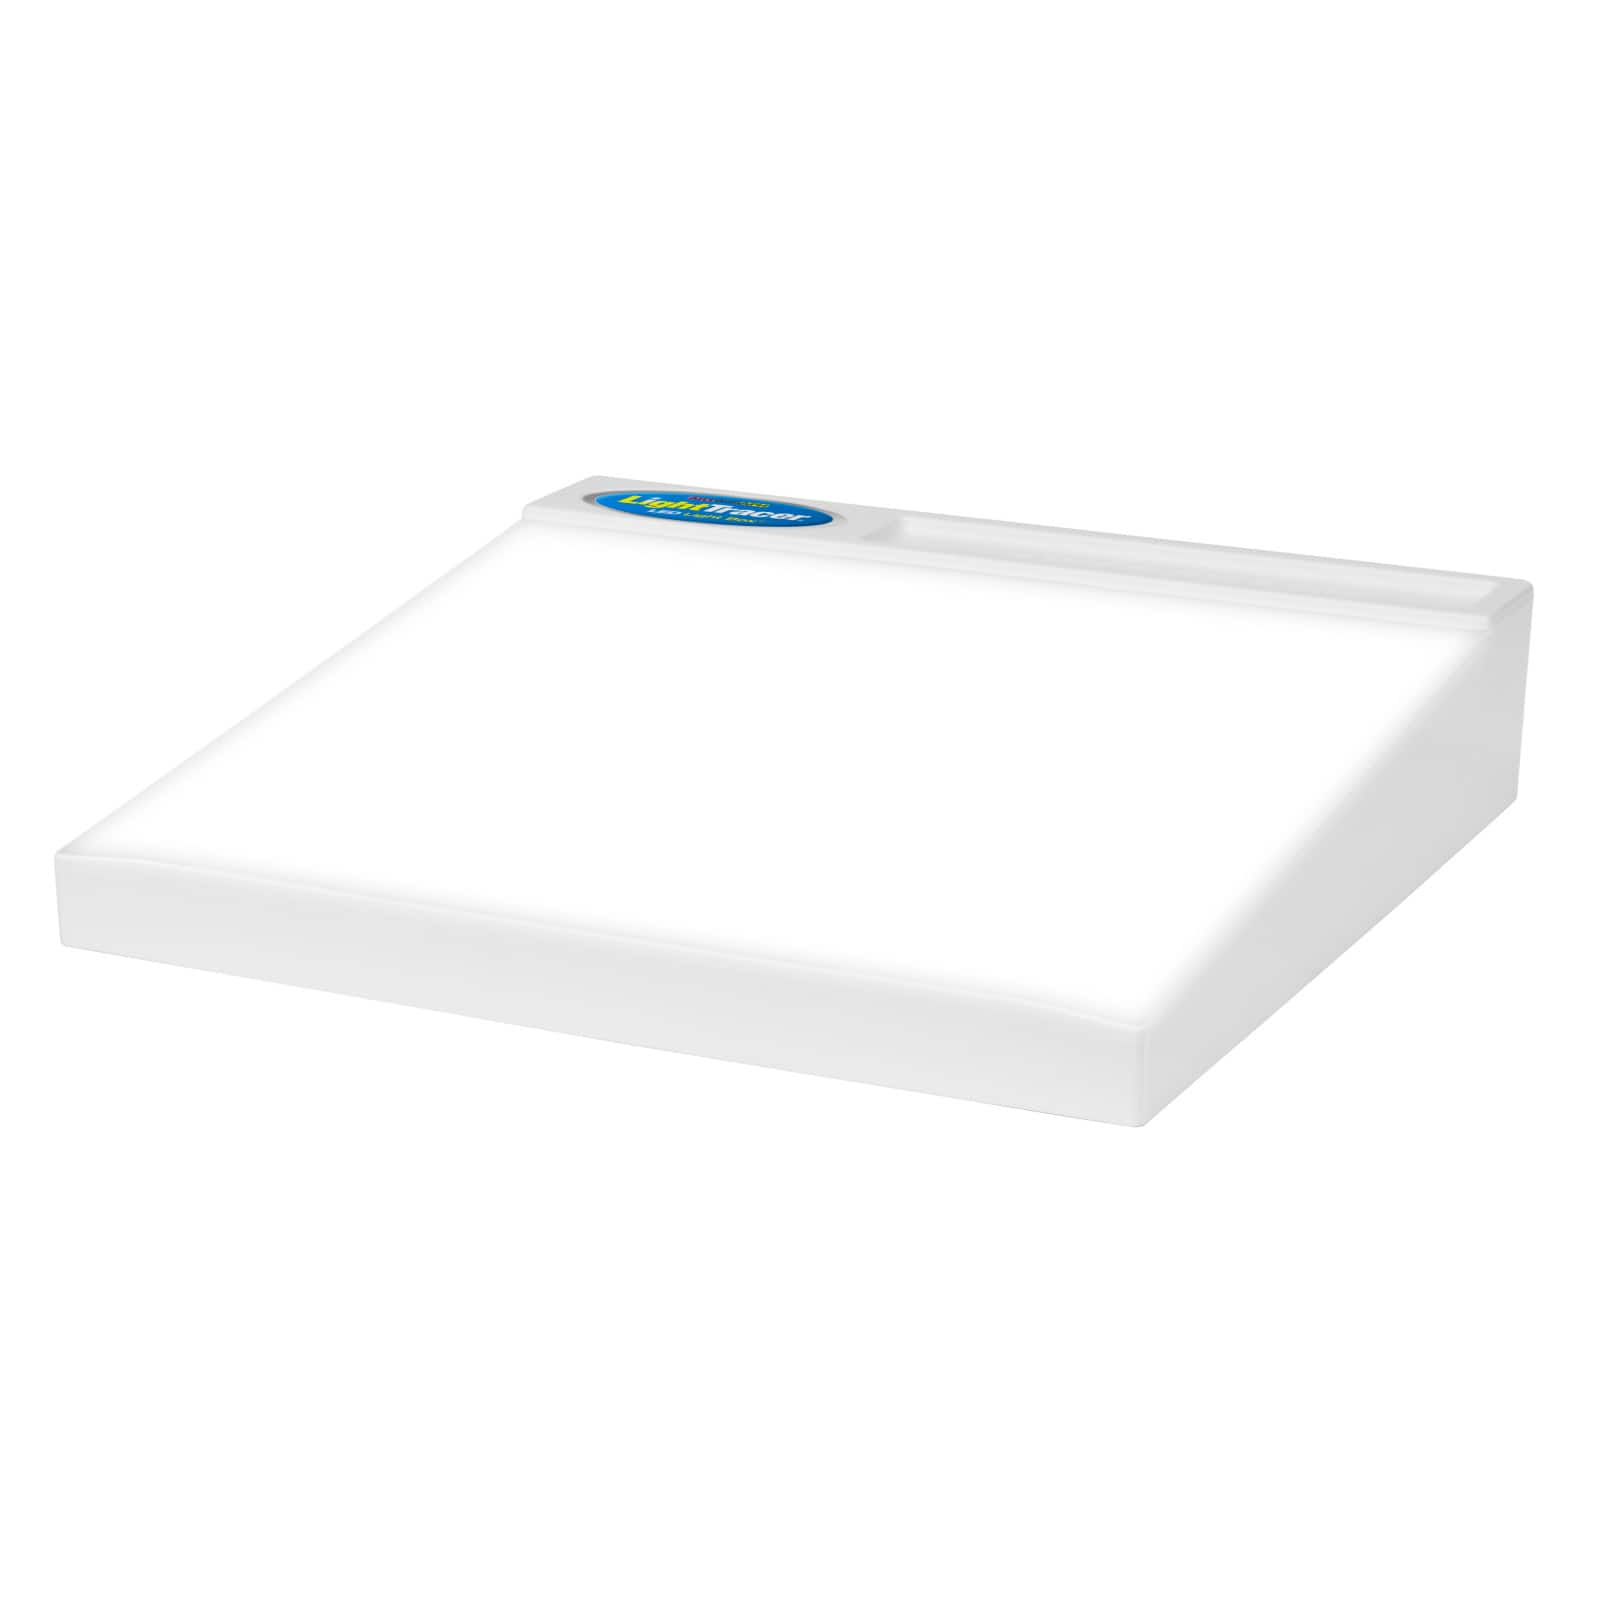 ARTOGRAPH LightTracer LED Lightbox for Art, Tracing, Drawing